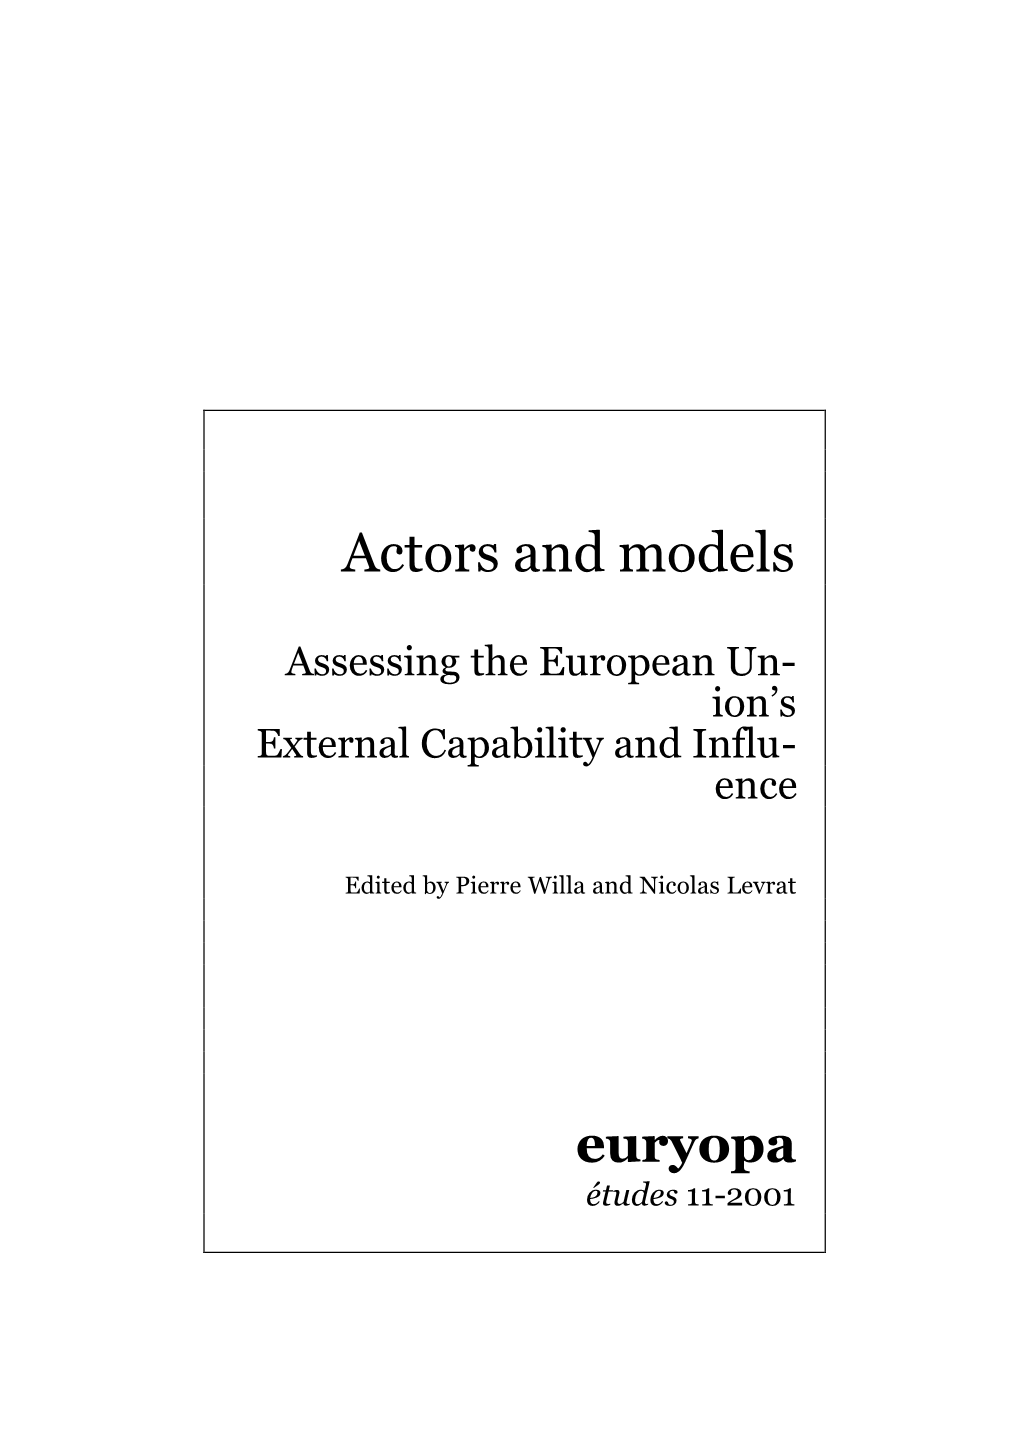 Actors and Models: Assessing the European Union's External